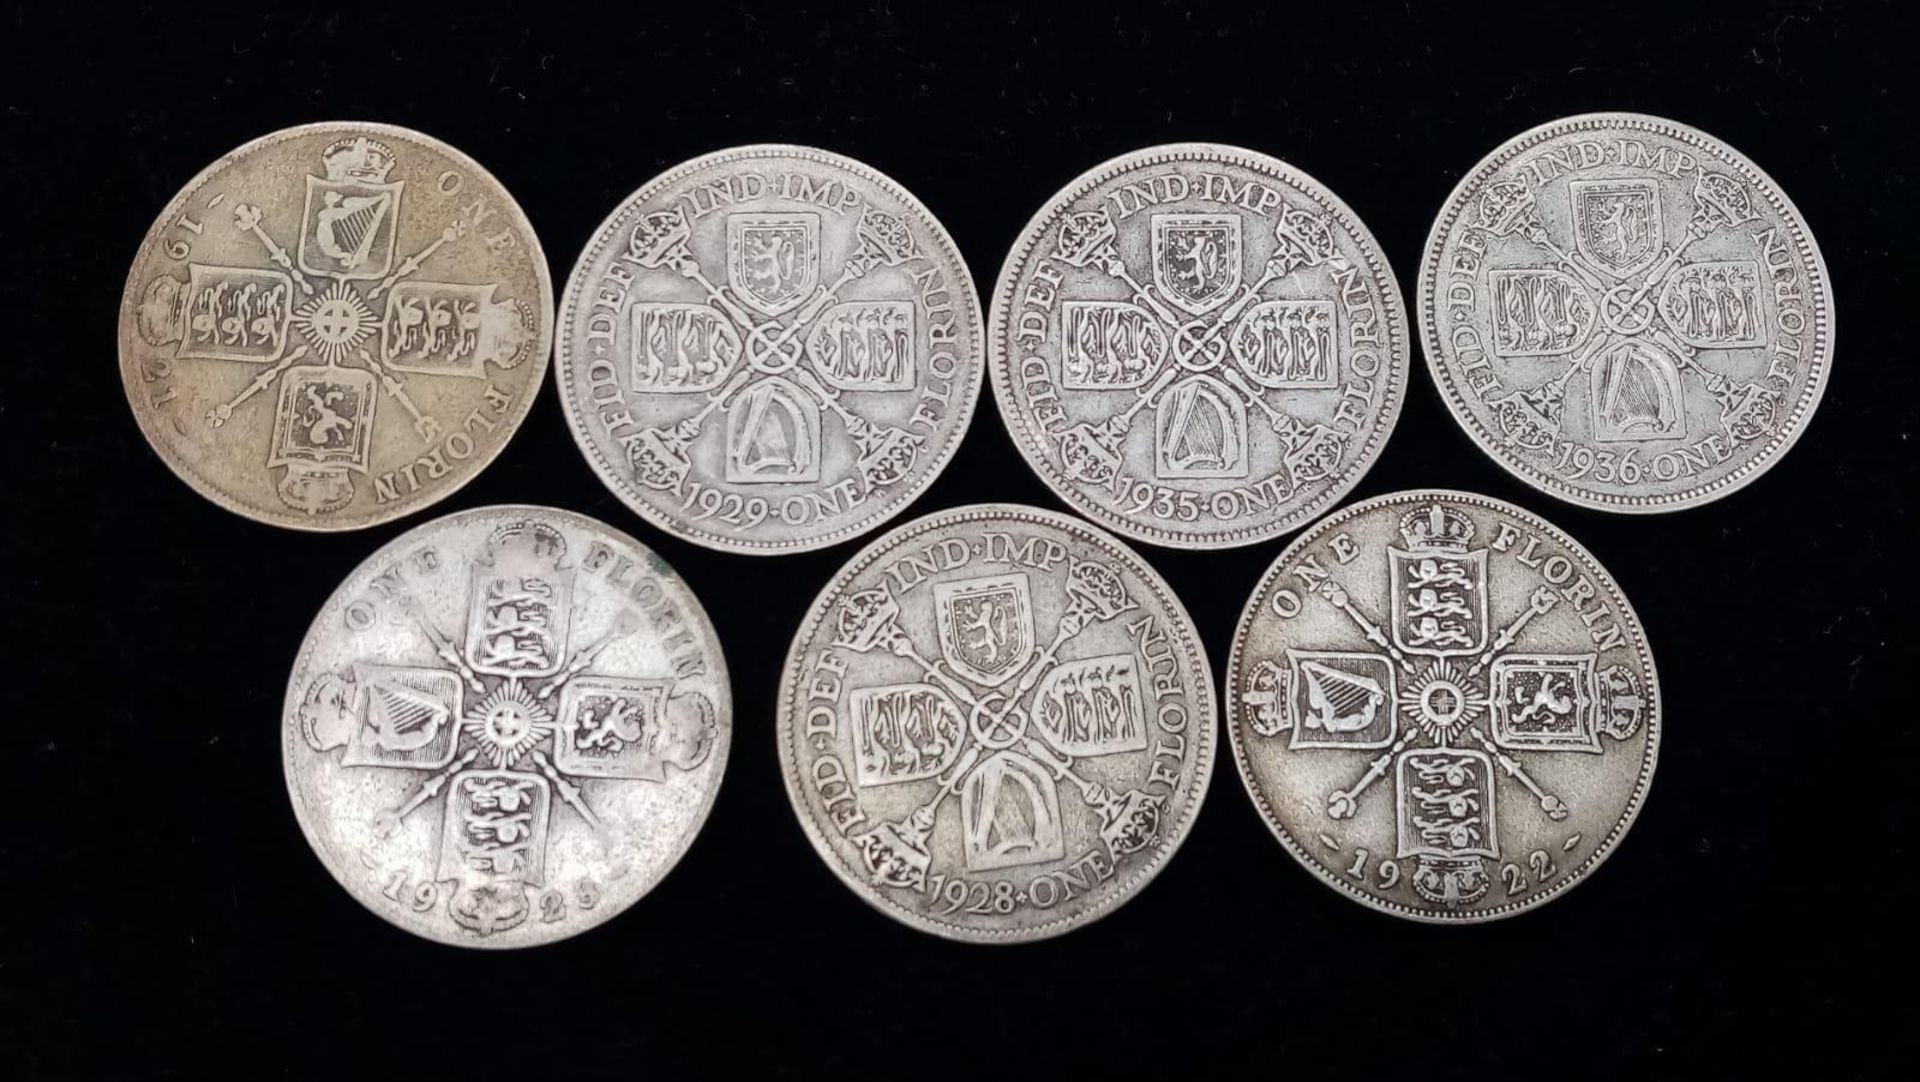 23 Pre 1947 Silver Florin Coins. Please see photos for conditions. 254g total weight. - Bild 2 aus 2